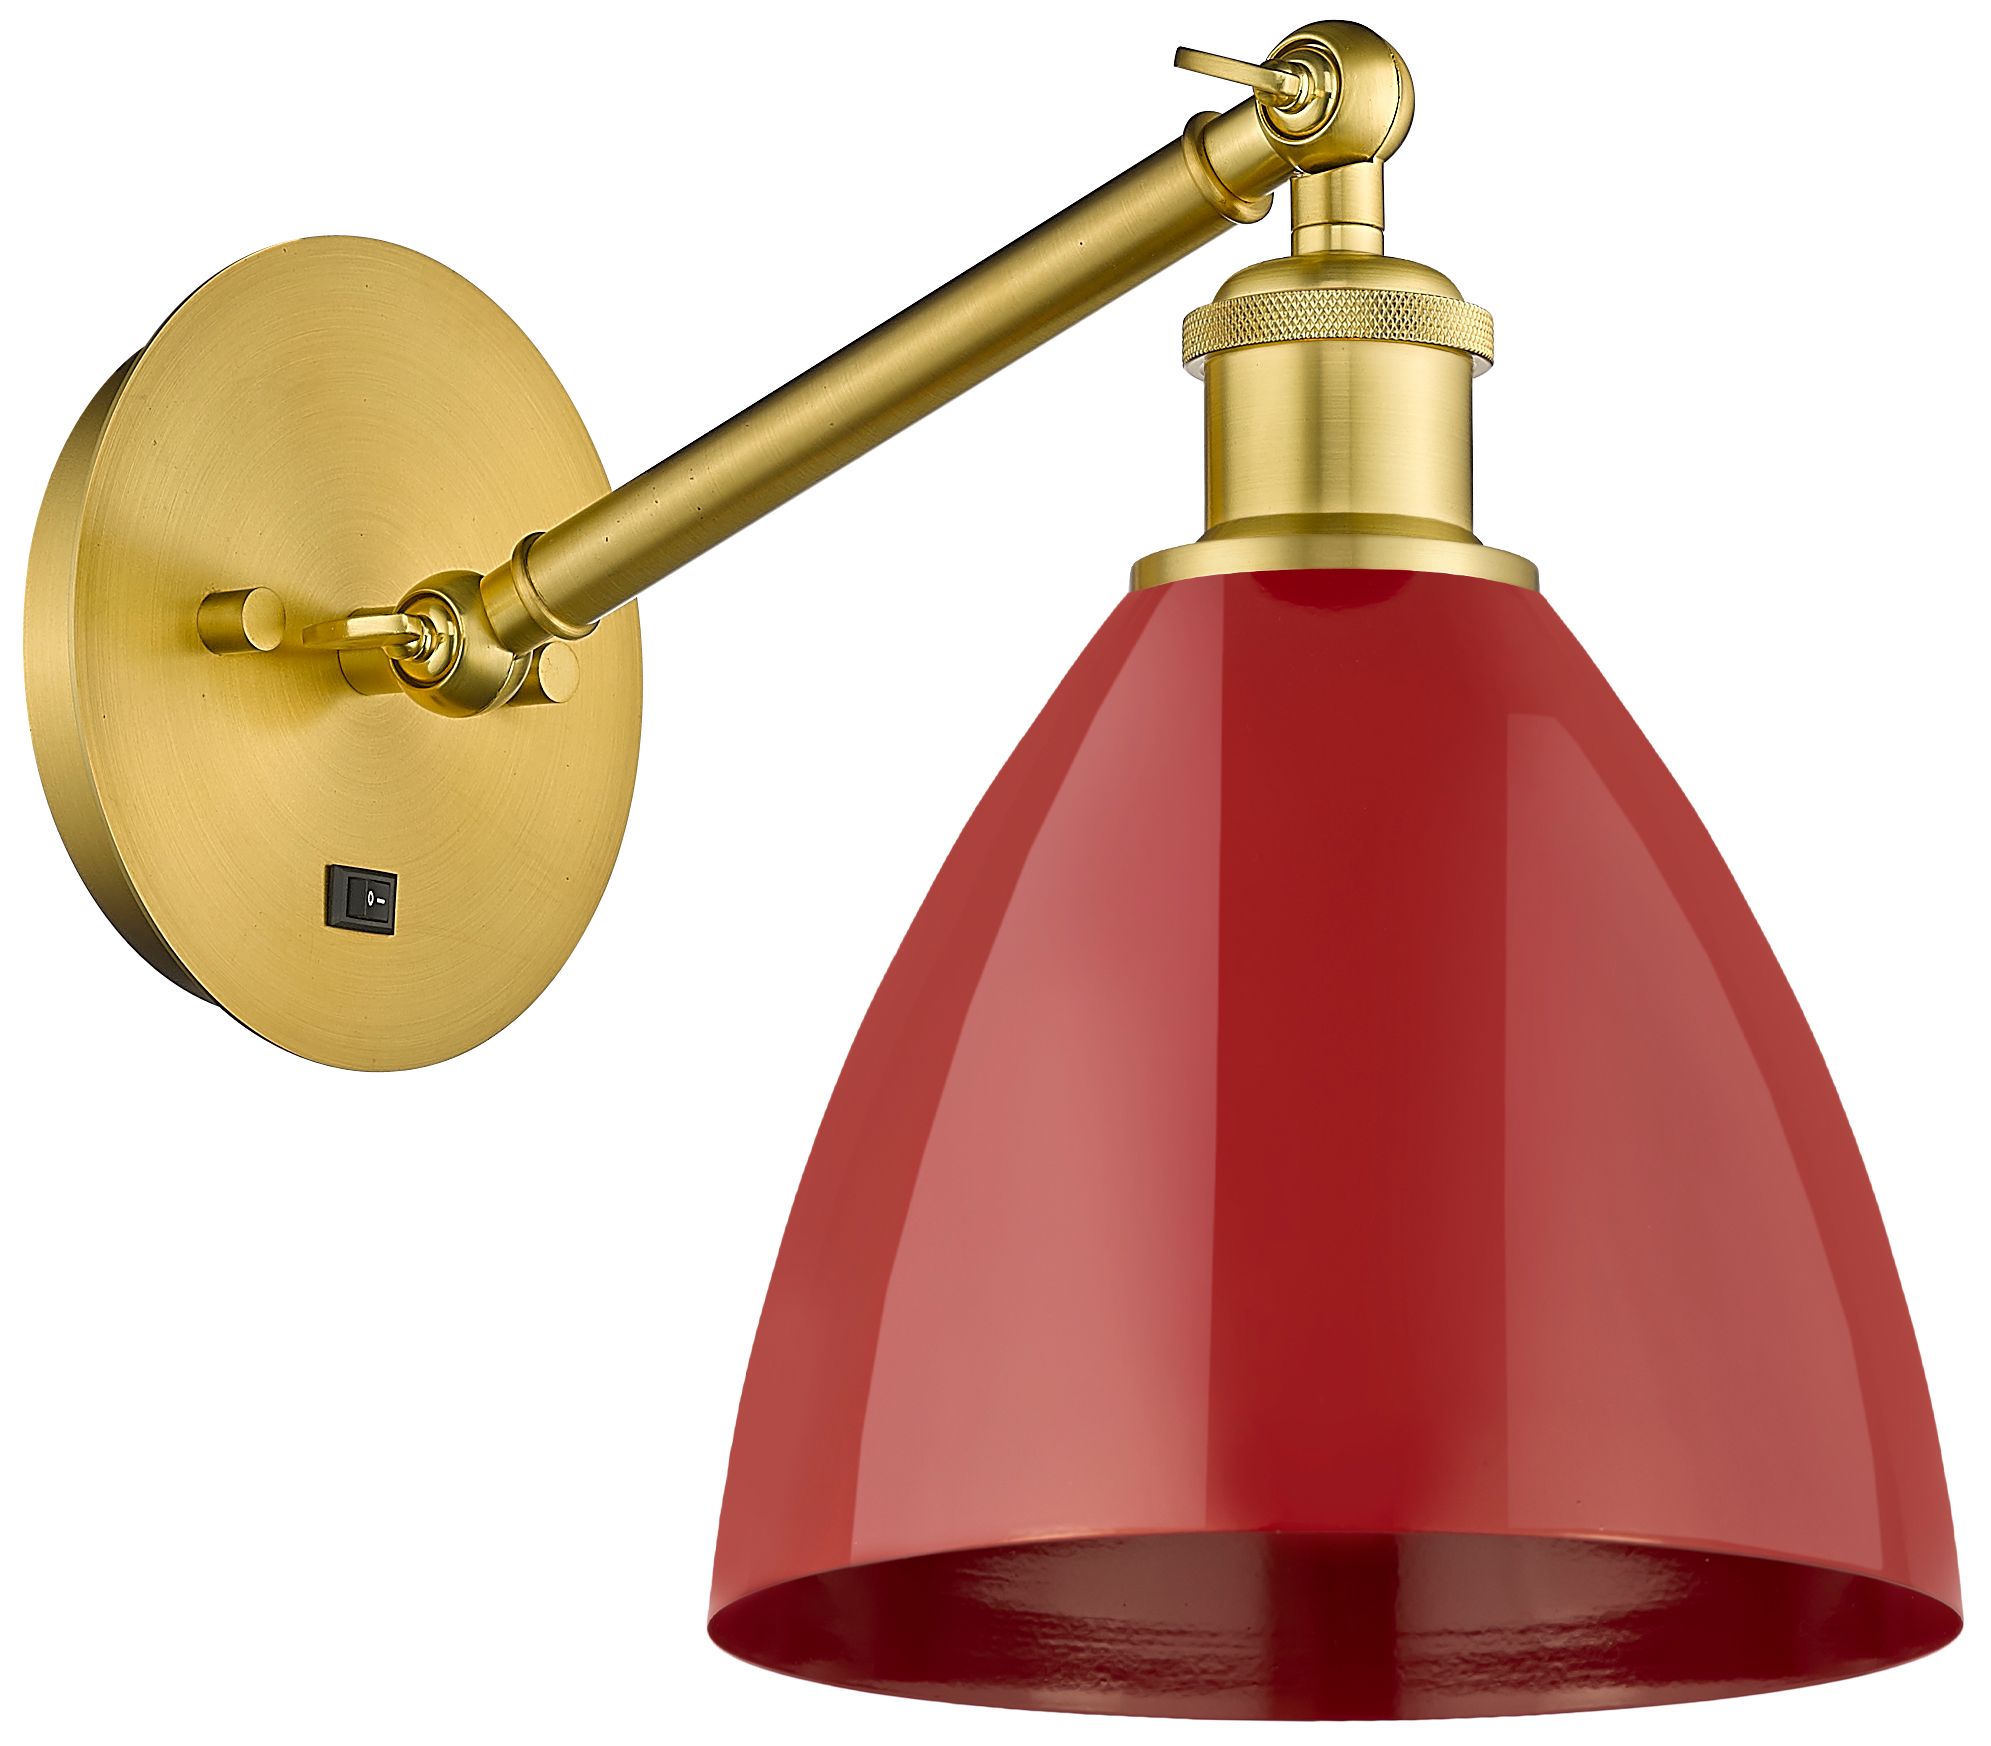 Ballston Plymouth Dome 13.25" High Brushed Nickel Sconce w/ Red Shade